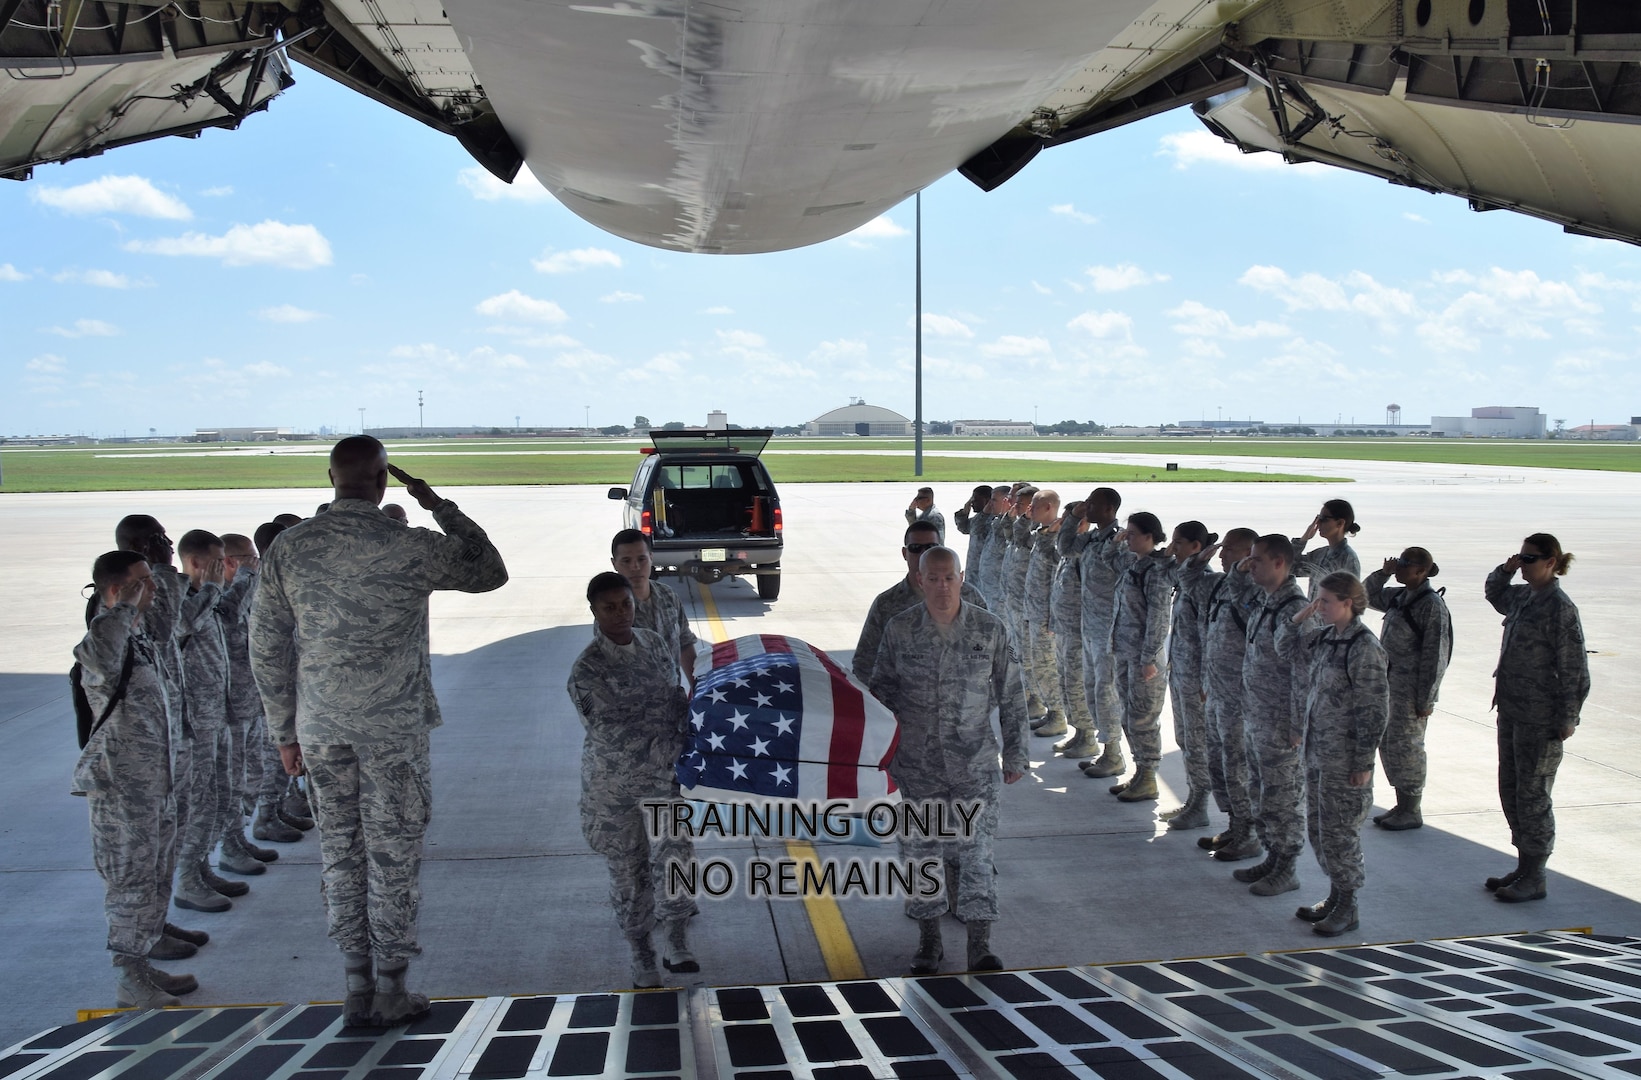 Citizen Airmen perform a mock dignified transfer of remains aboard a C-5M Super Galaxy at Joint Base San Antonio-Lackland July 14. The training was for Reserve Citizen Airmen chaplain candidates. The candidates are with the Air Force Chaplain Candidate Program, who after graduation and an ecclesiastical endorsement, are then eligible to become chaplains in the U.S. Air Force Reserve, Air National Guard or active duty component.